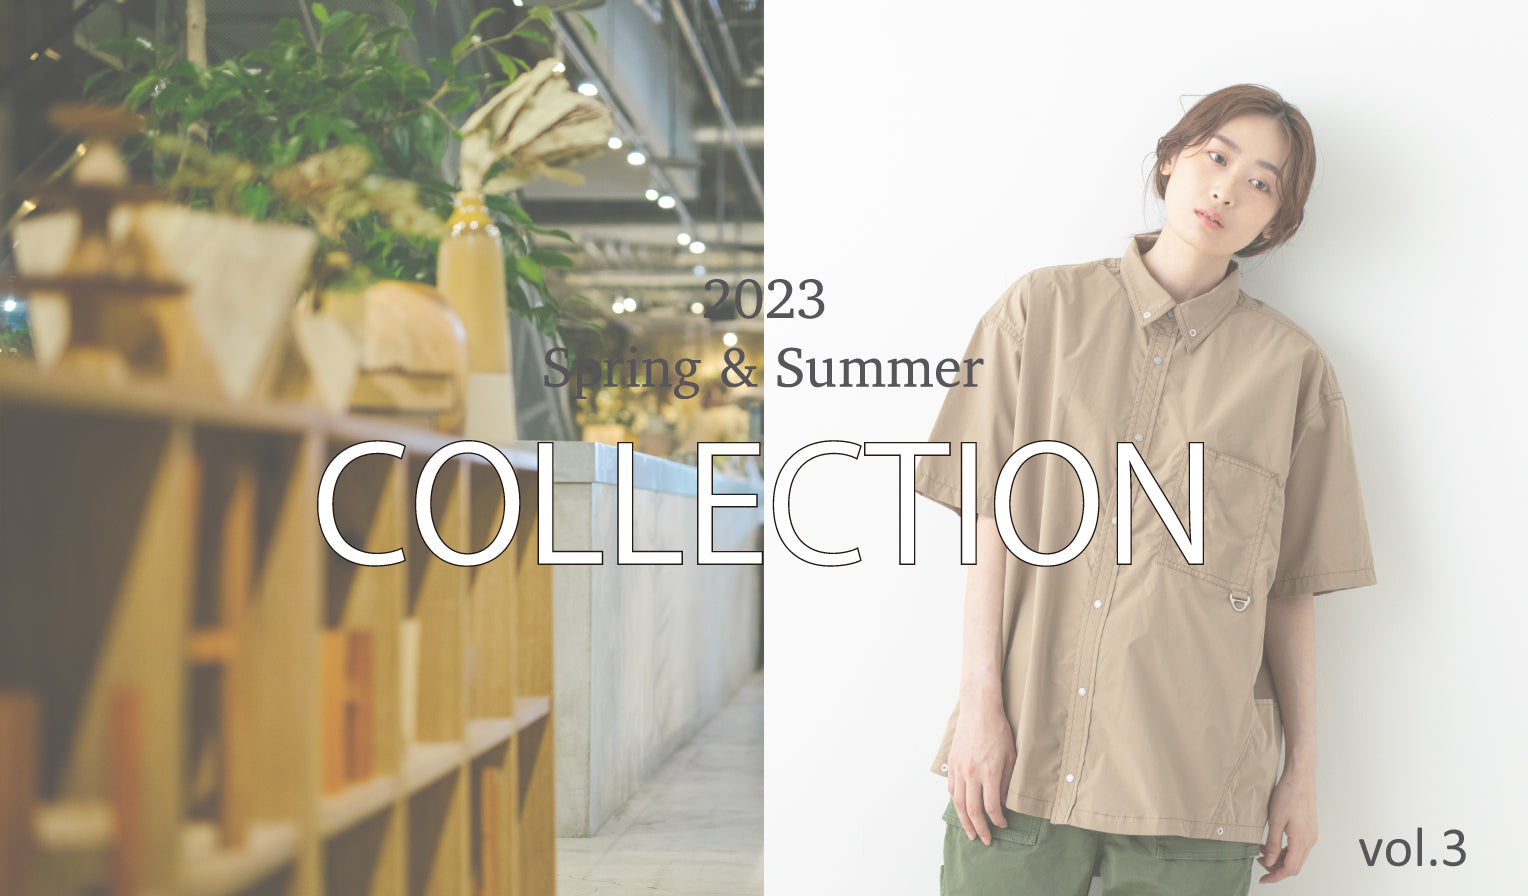 2023 Spring ＆ Summer COLLECTION  vol.3